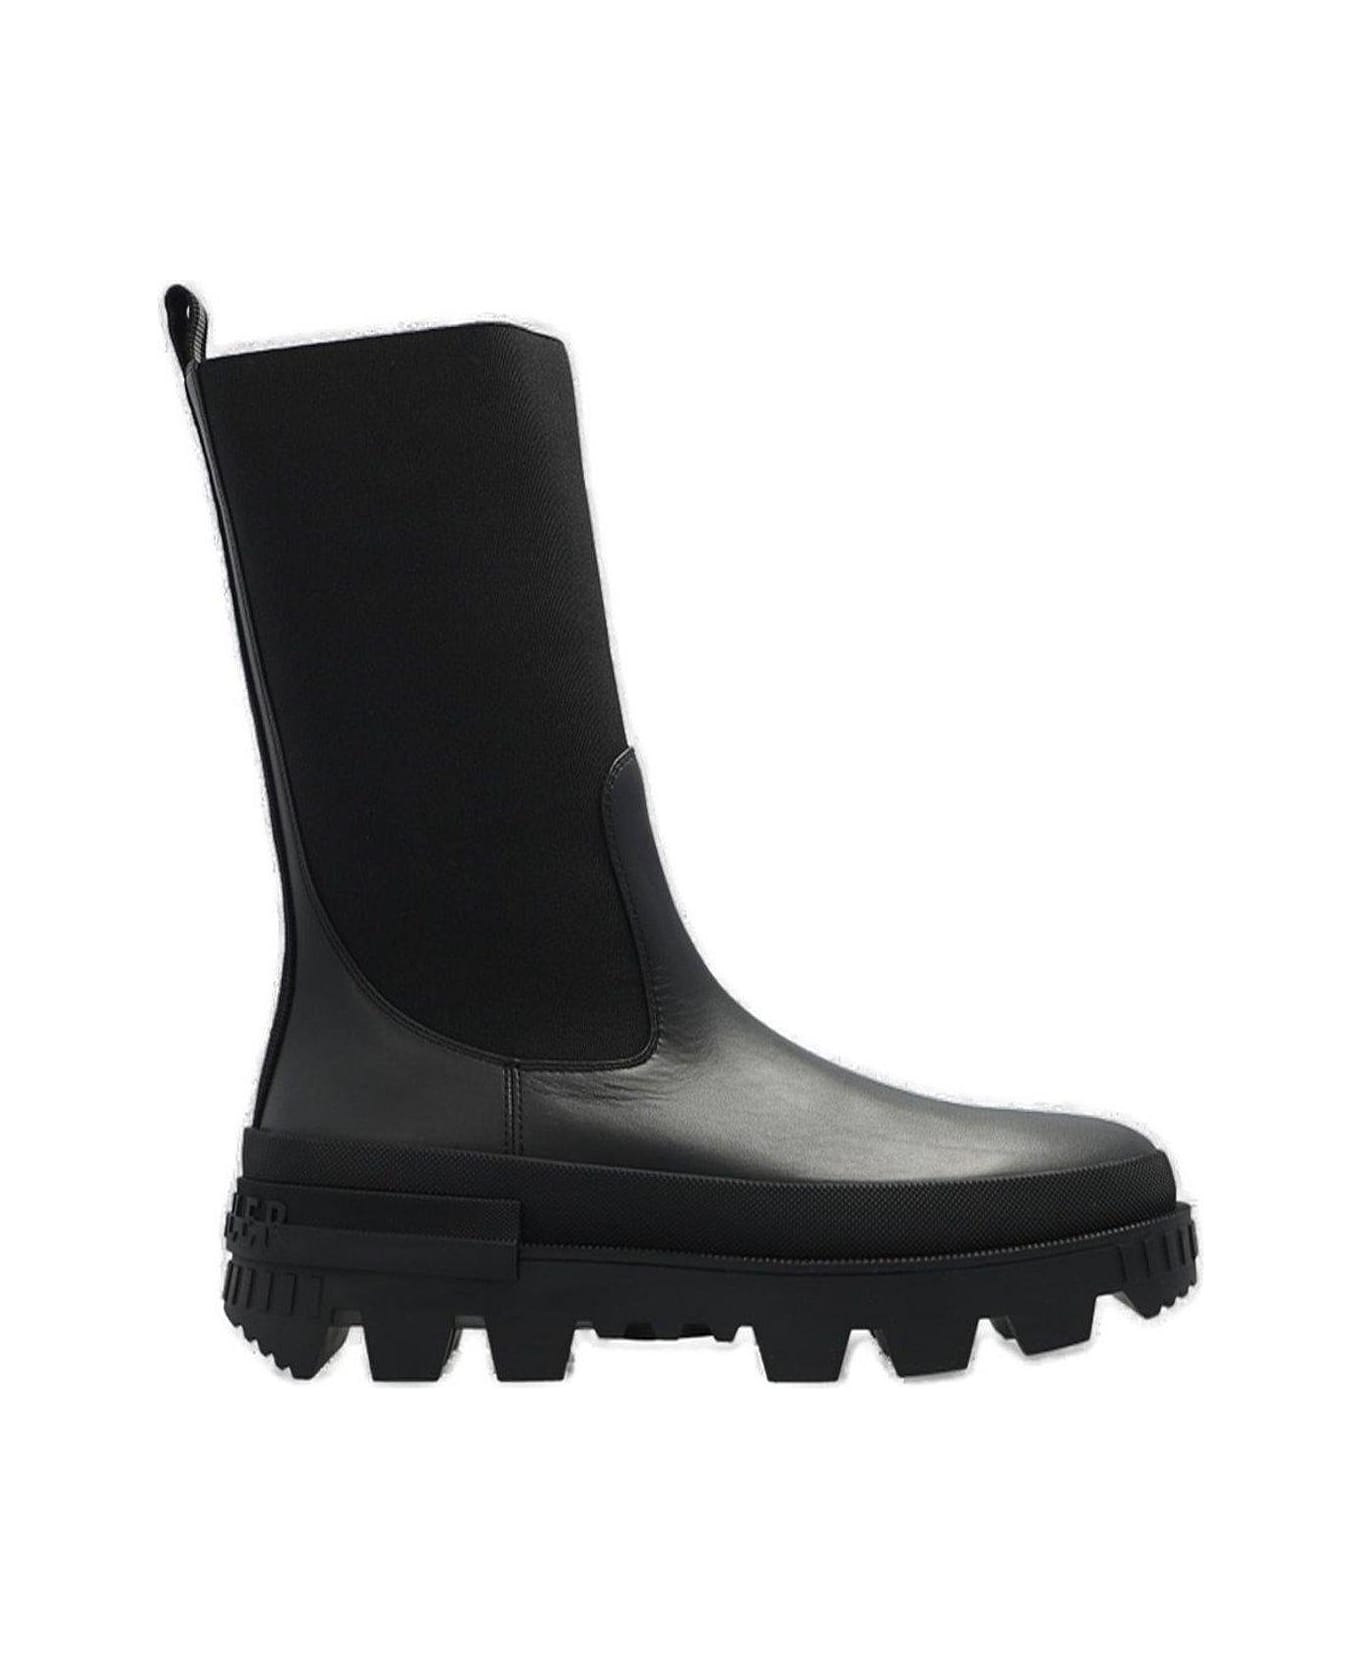 Moncler Neue Chelsea Ankle Boots - Black ブーツ